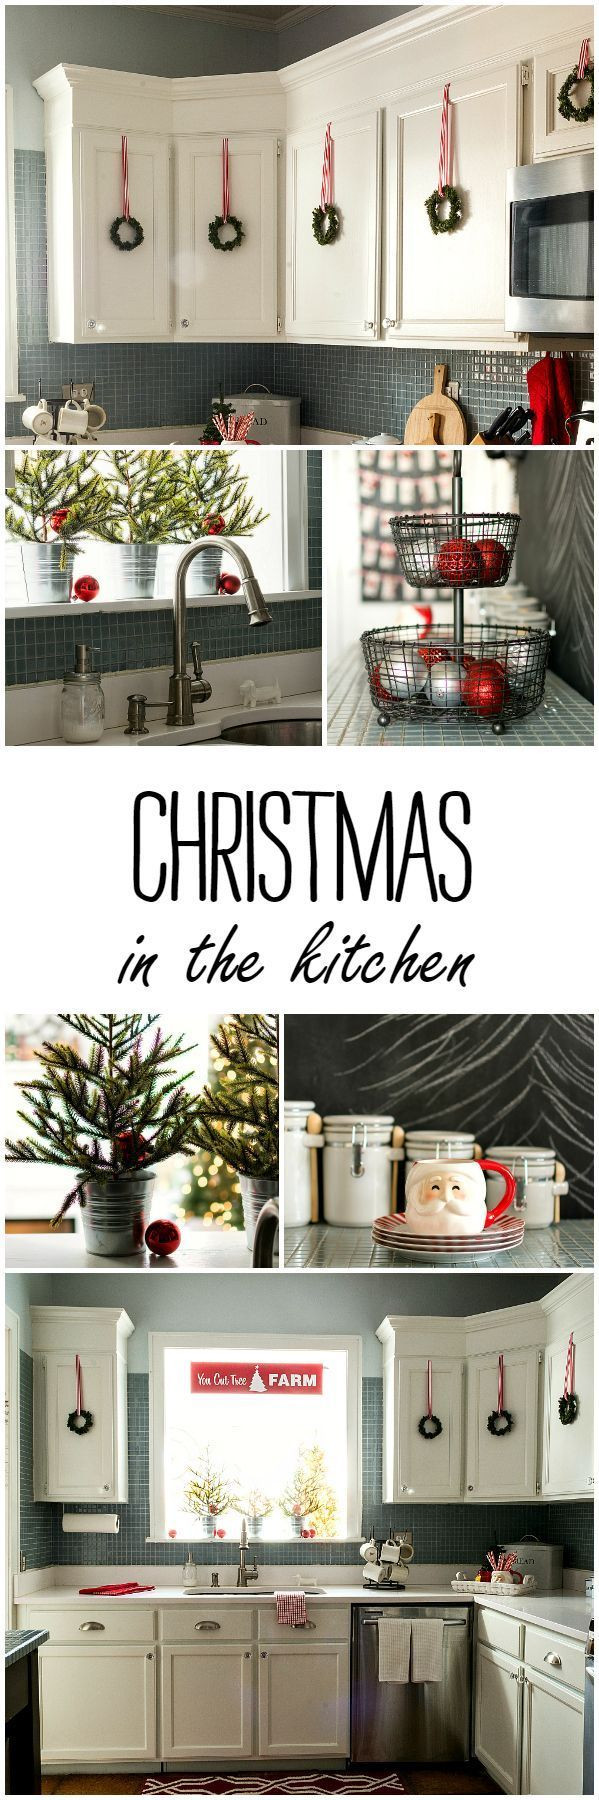 Christmas Kitchen Decorating Ideas
 1000 ideas about Christmas Home Decorating on Pinterest